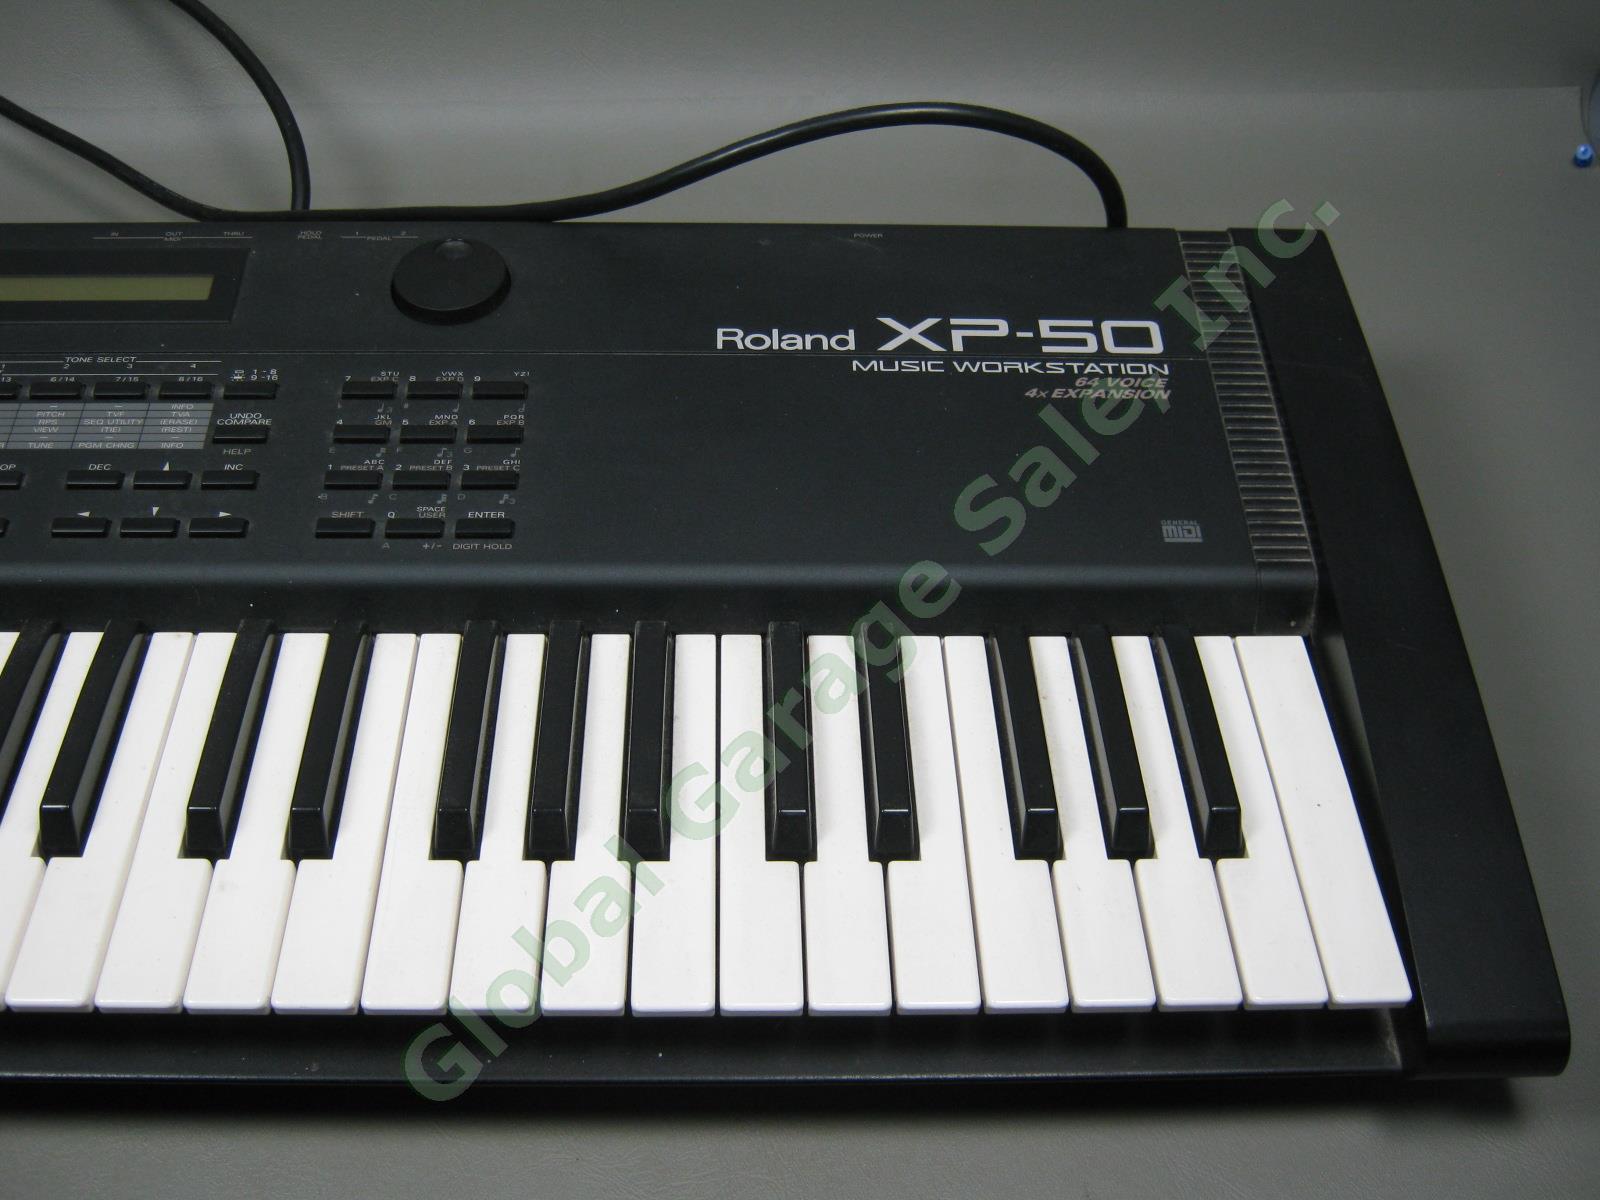 Roland XP-50 Music Workstation 64 Voice 4x Expansion Synthesizer Keyboard +Pedal 4